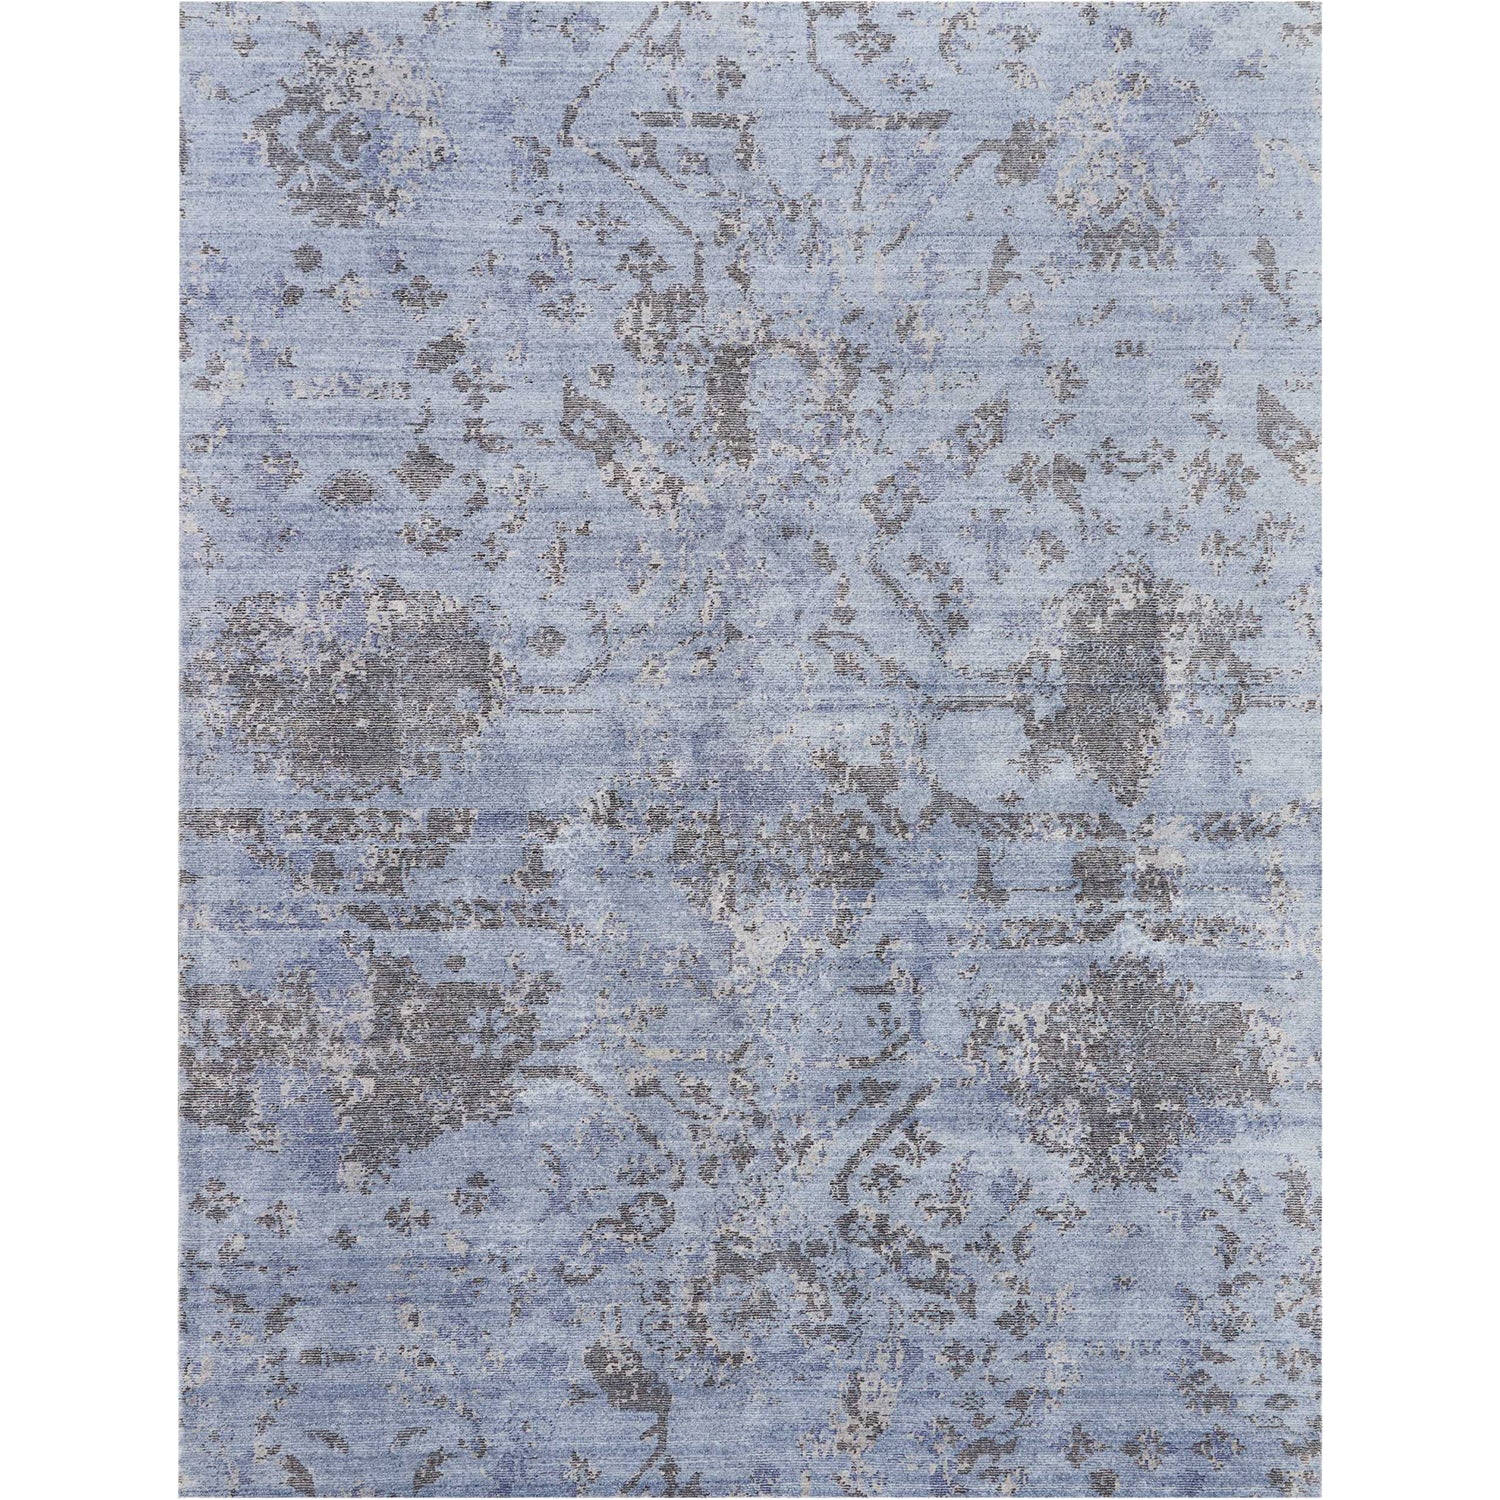 Vintage blue carpet with faded ornamental design for classic interiors.